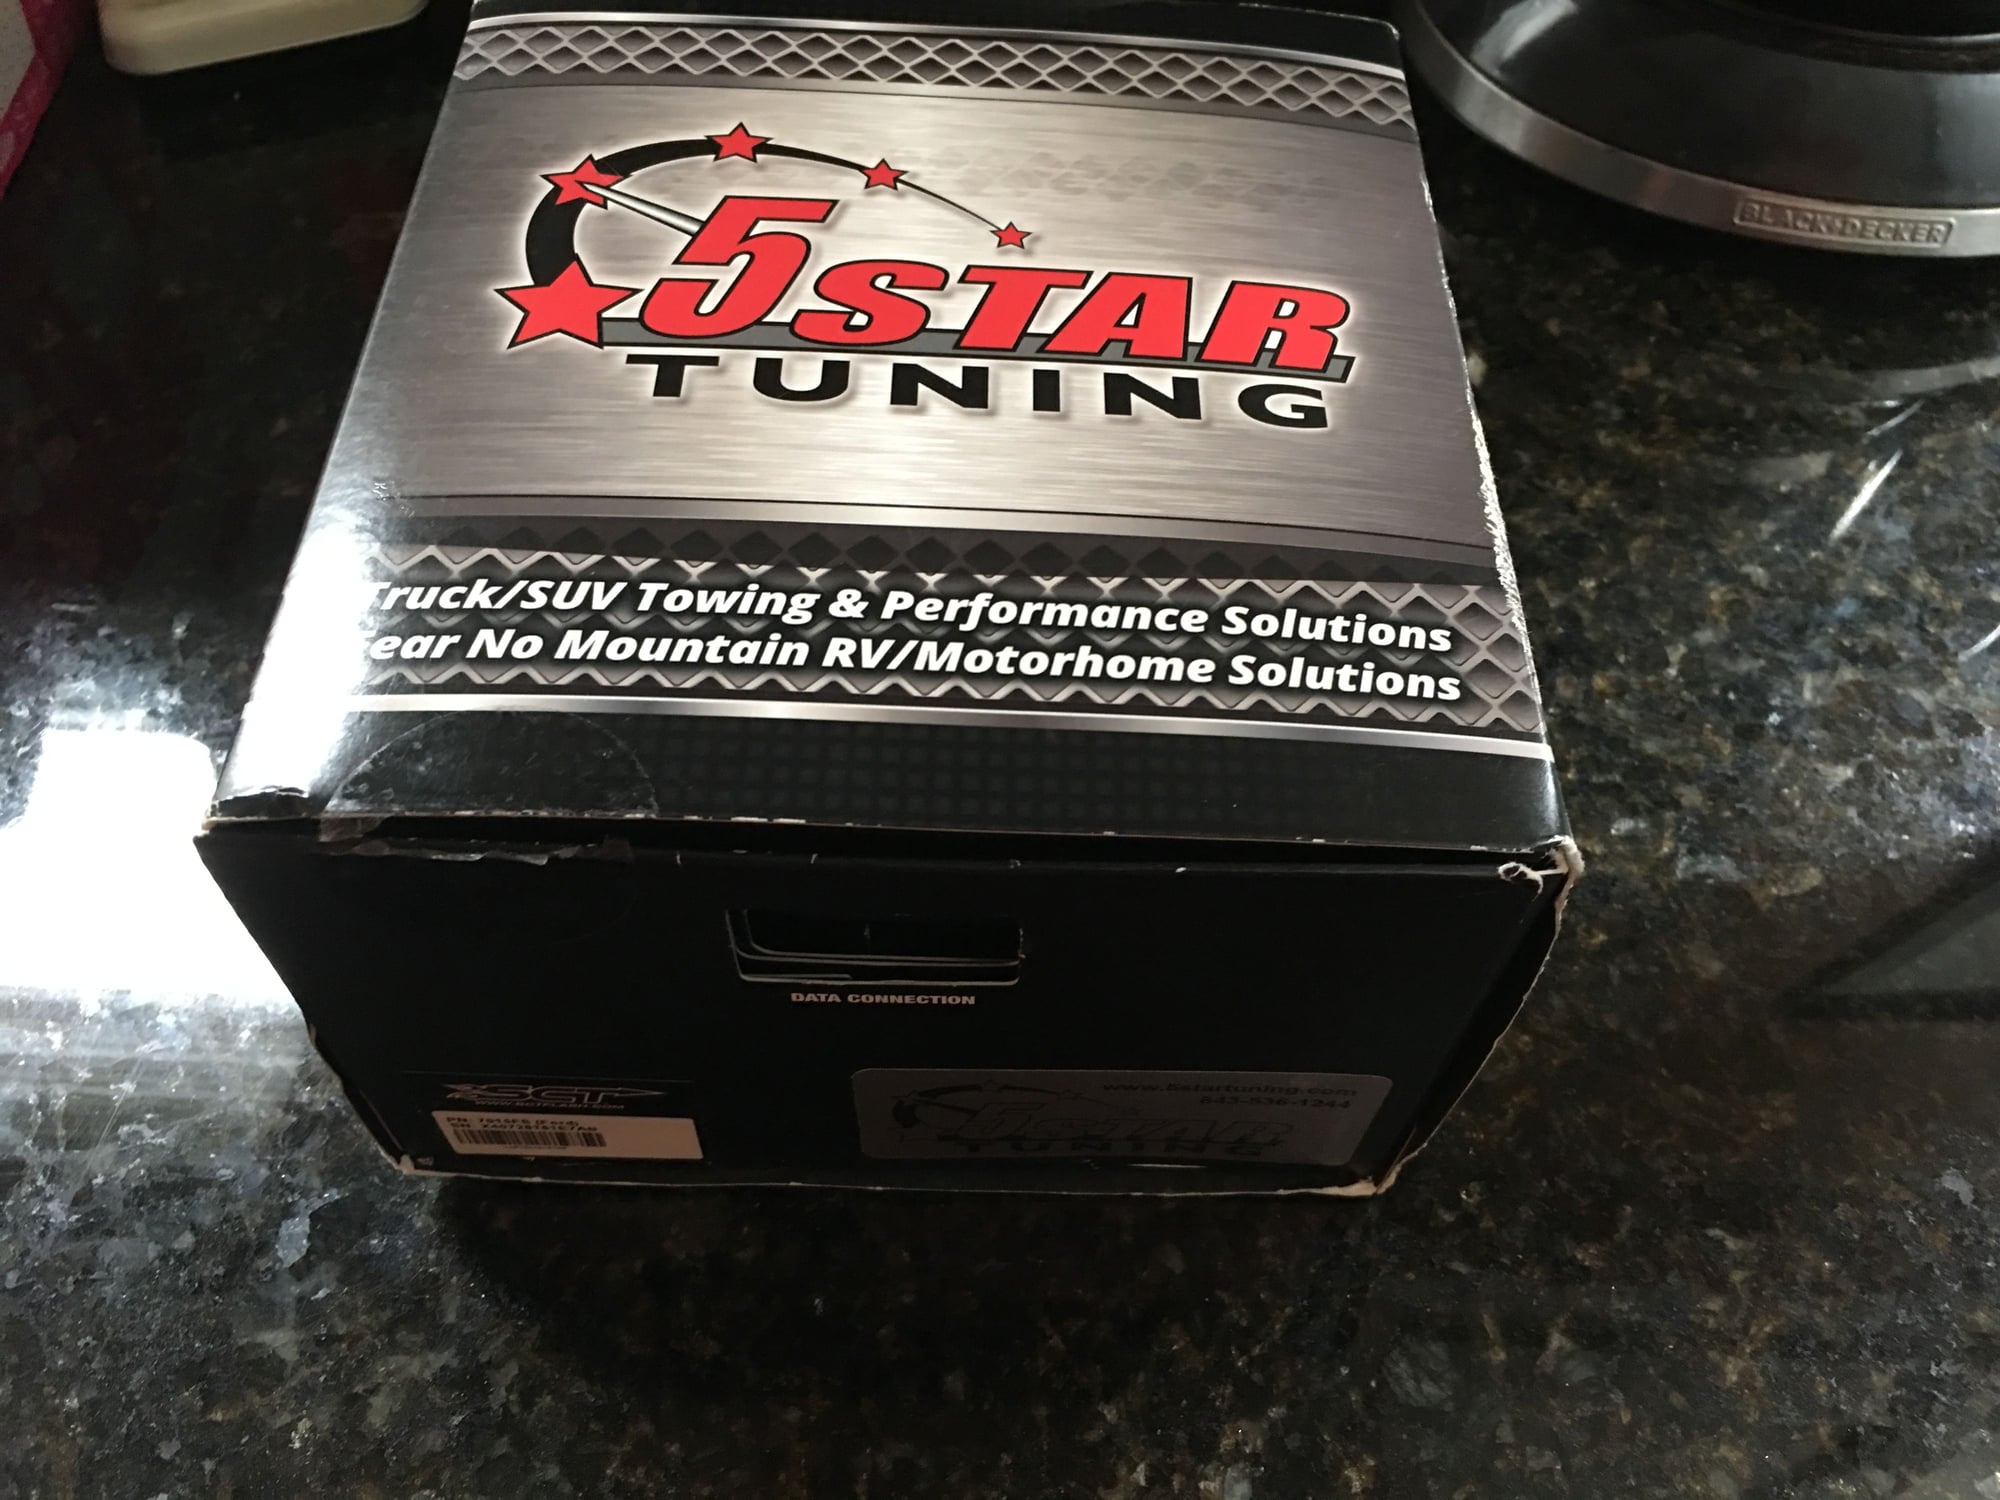 Accessories - 5 Star Tunning SCT X4 tunner - Used - 1999 to 2004 Ford 1 Ton Pickup - Cincinnati, OH 45238, United States